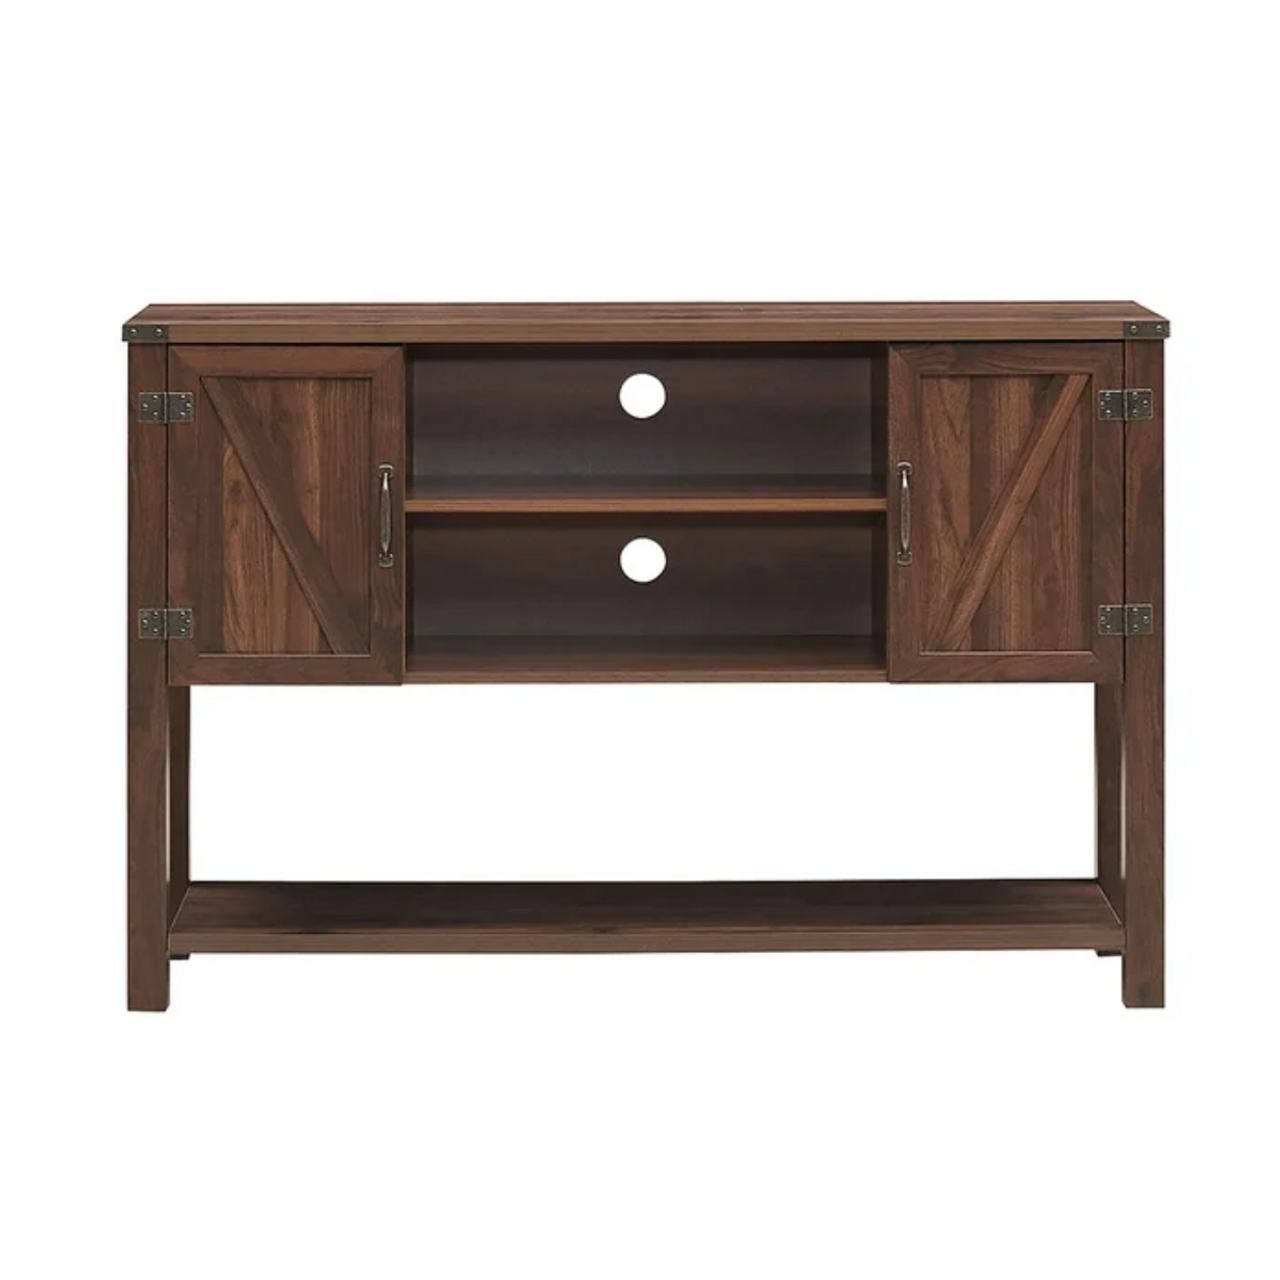 Costway Barn Door 60" TV Stand Console with Storage product image